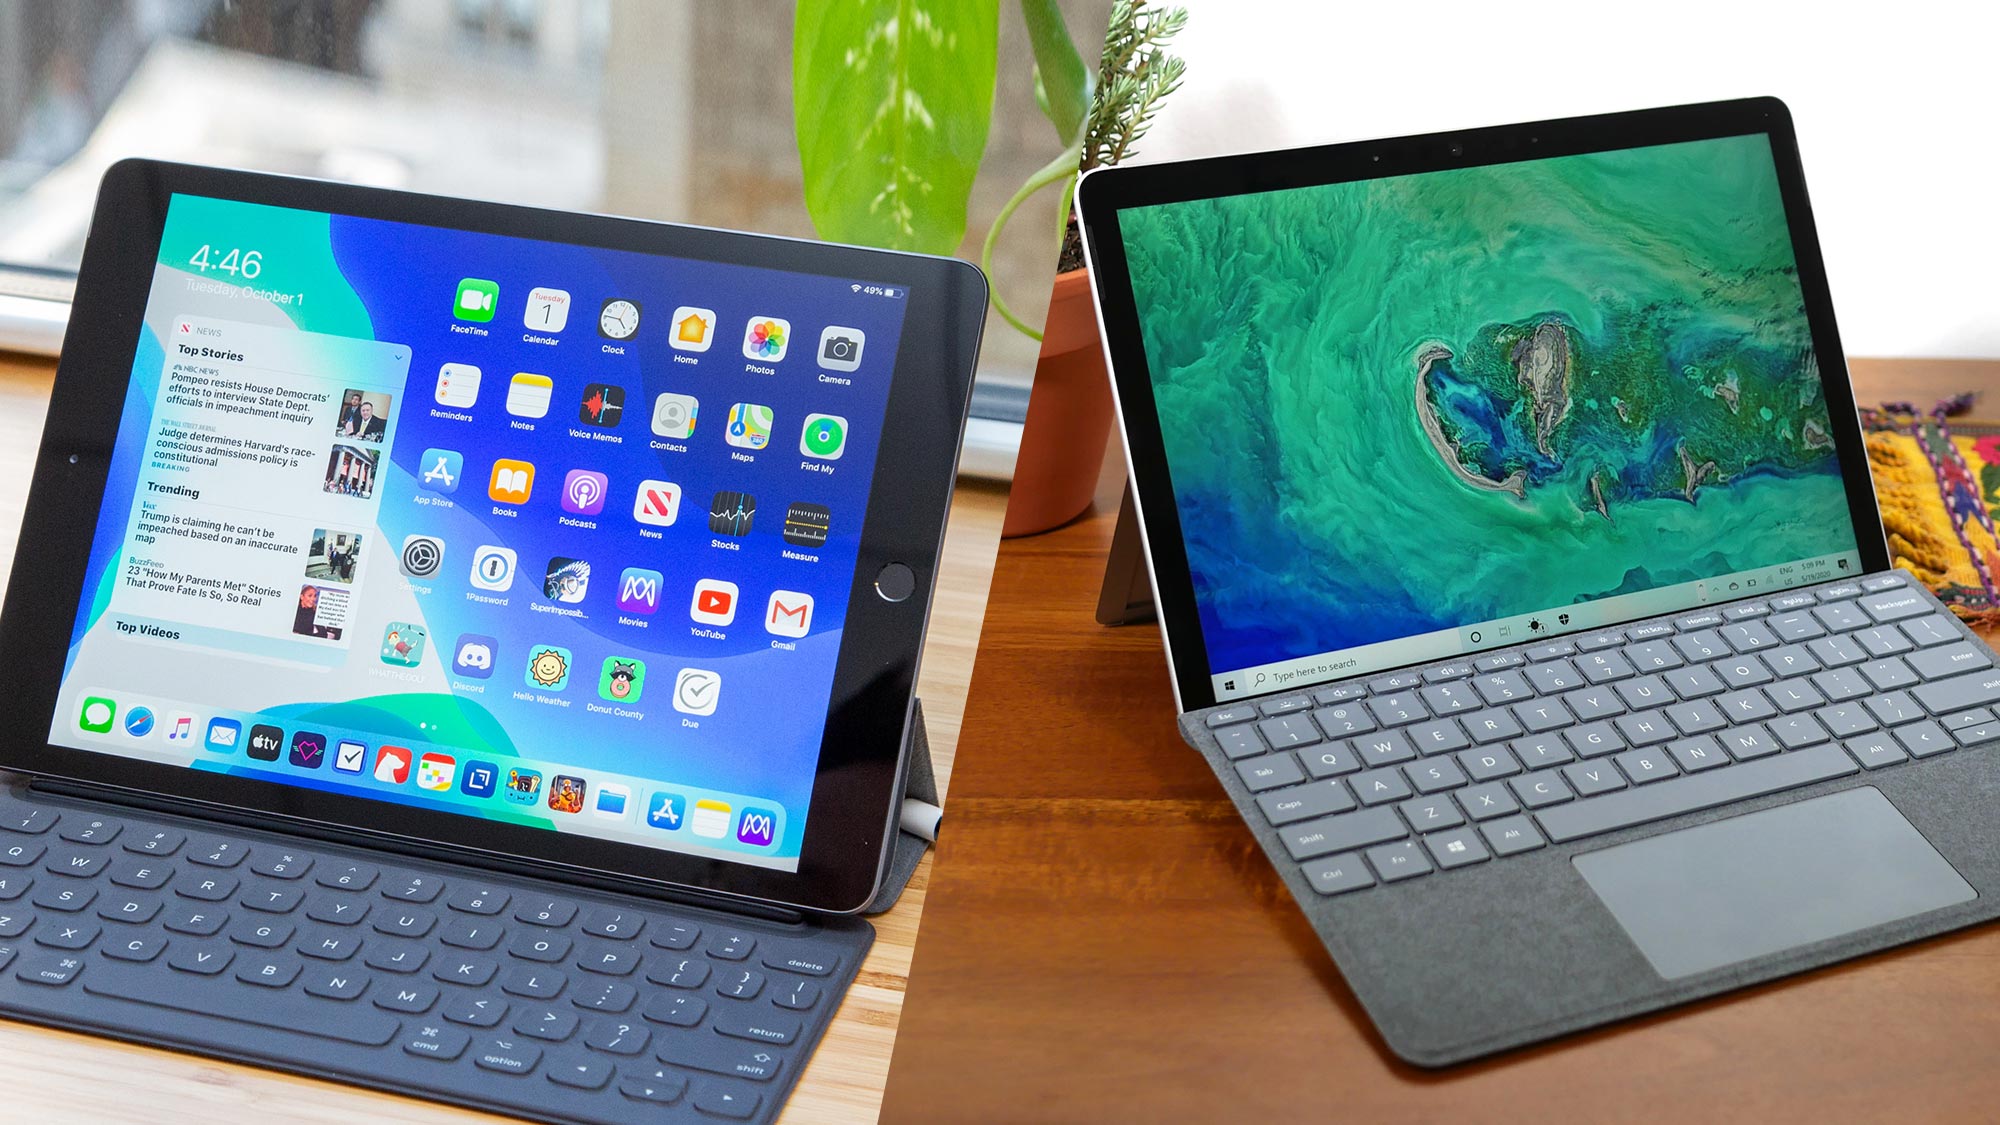 Surface Go 2 Vs Ipad Which Budget Tablet Wins Laptop Mag